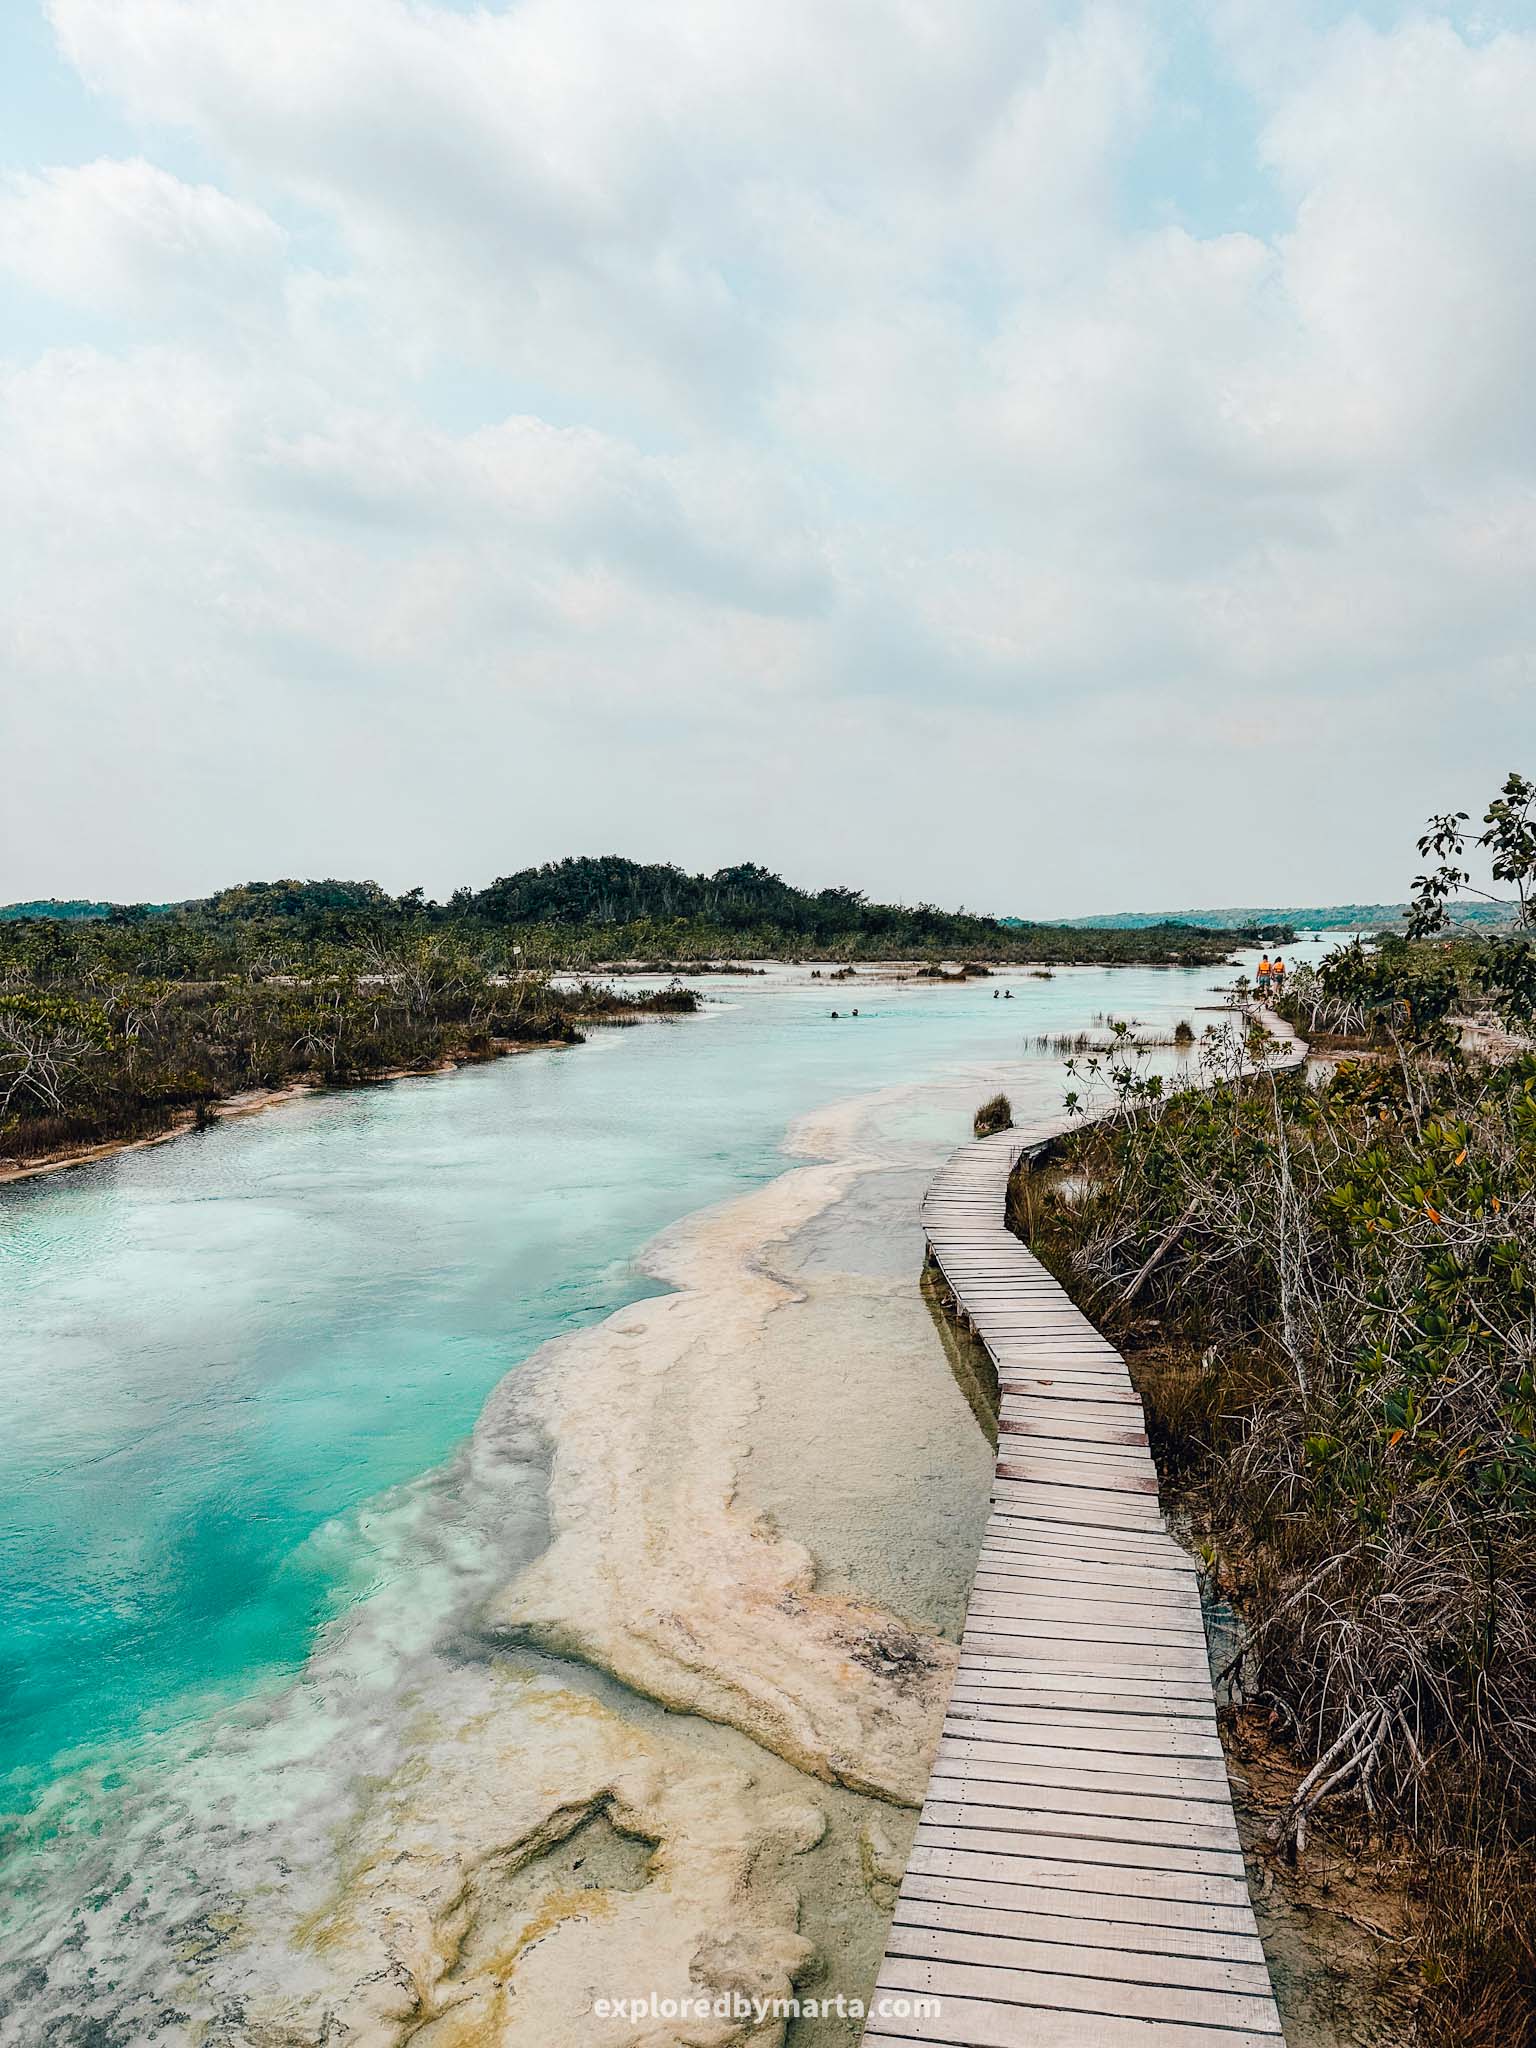 Bacalar, Mexico-best things to do in Bacalar - floating down the stream at Los Rapidos